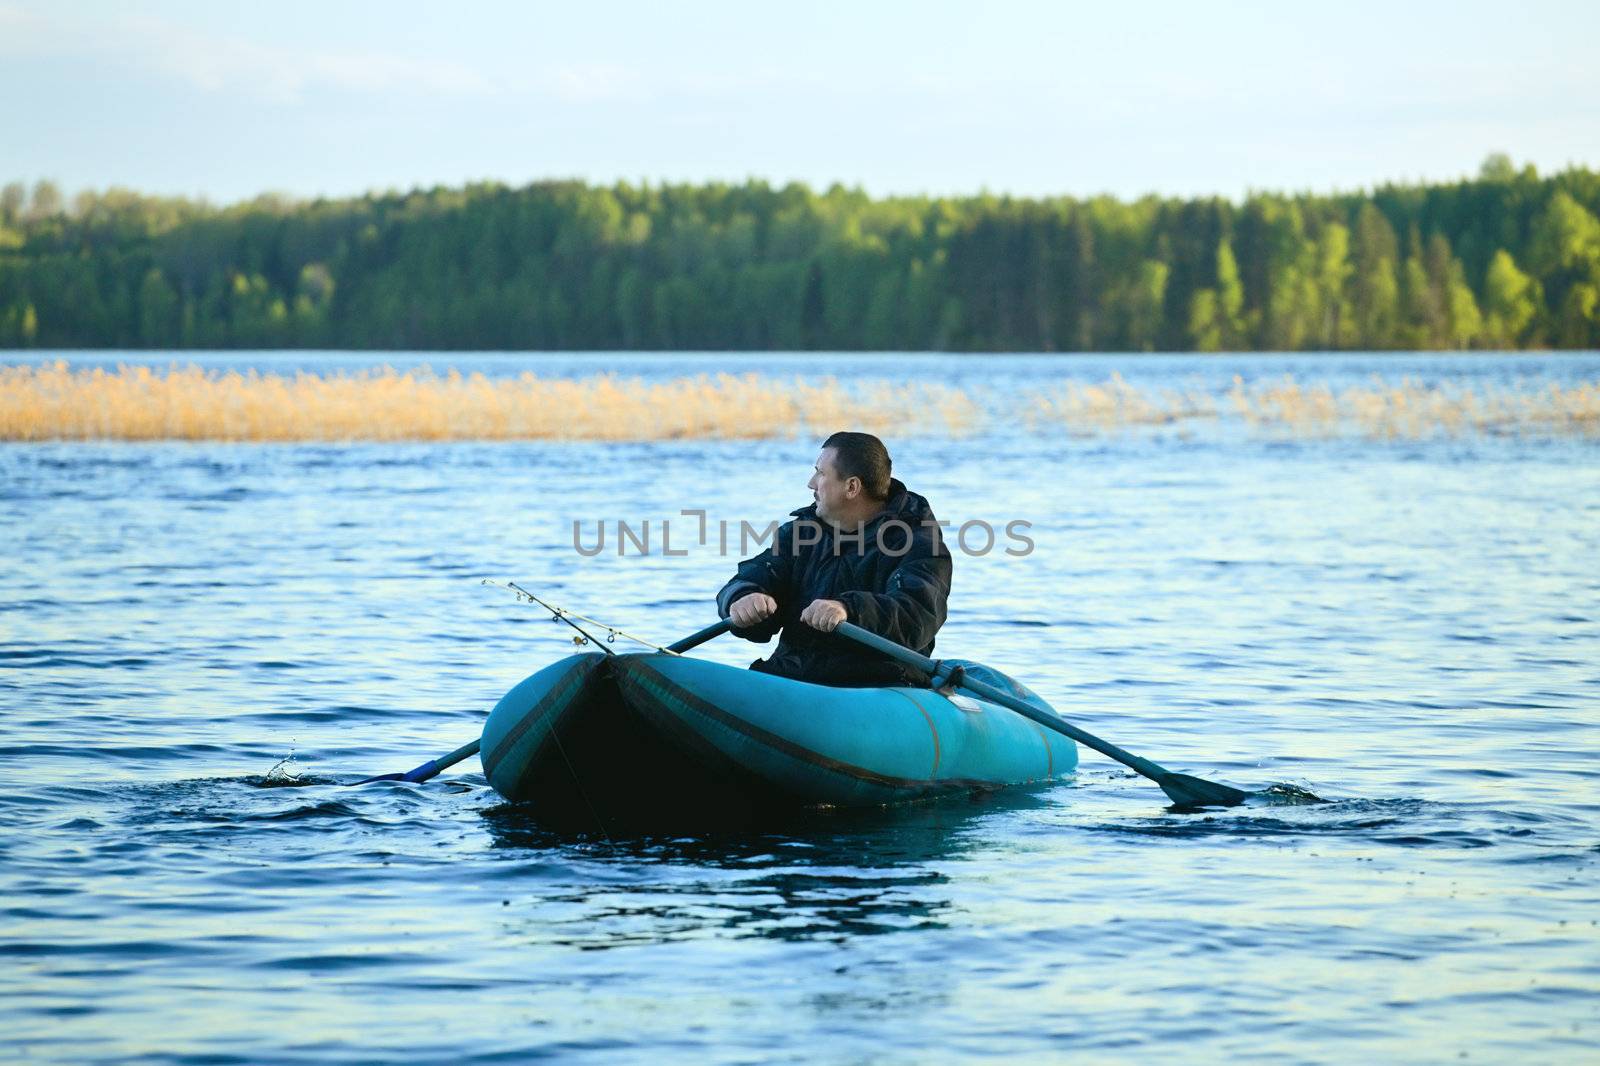 fisherman in rubber boat on a lake